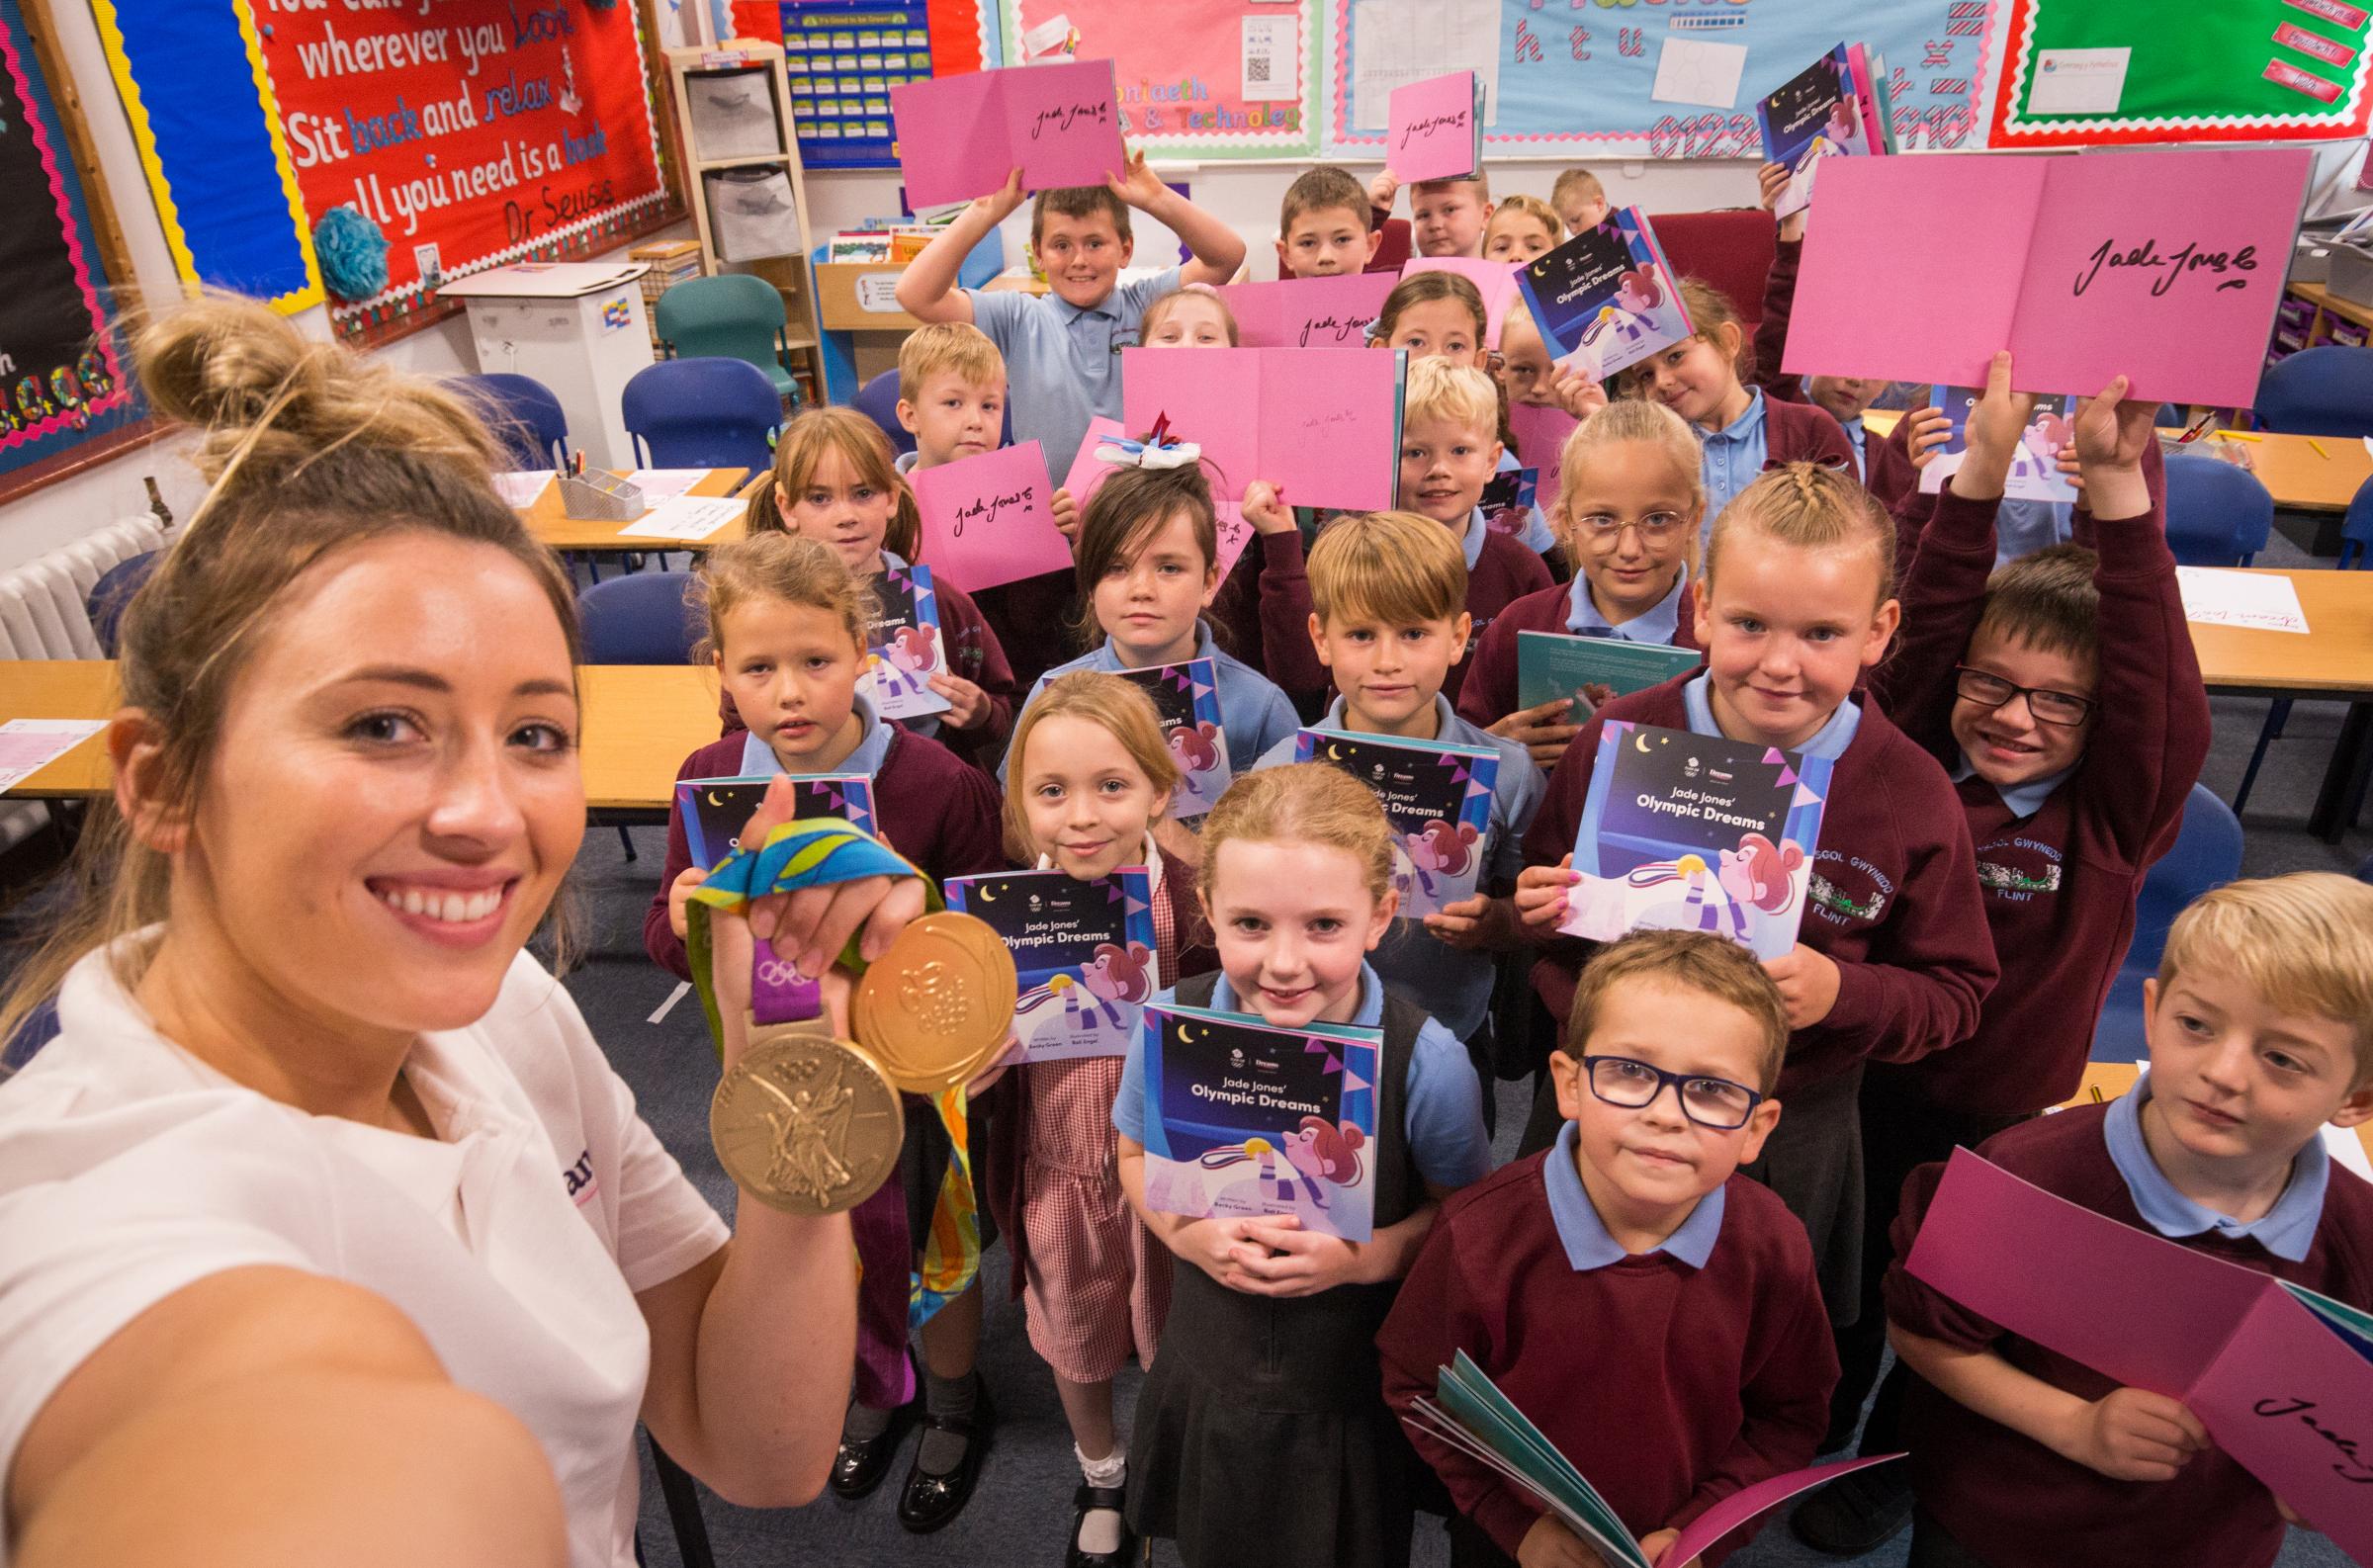 Jade Jones visited her former primary school, Ysgol Gywnedd, to see staff and students. [Images: Dreams]